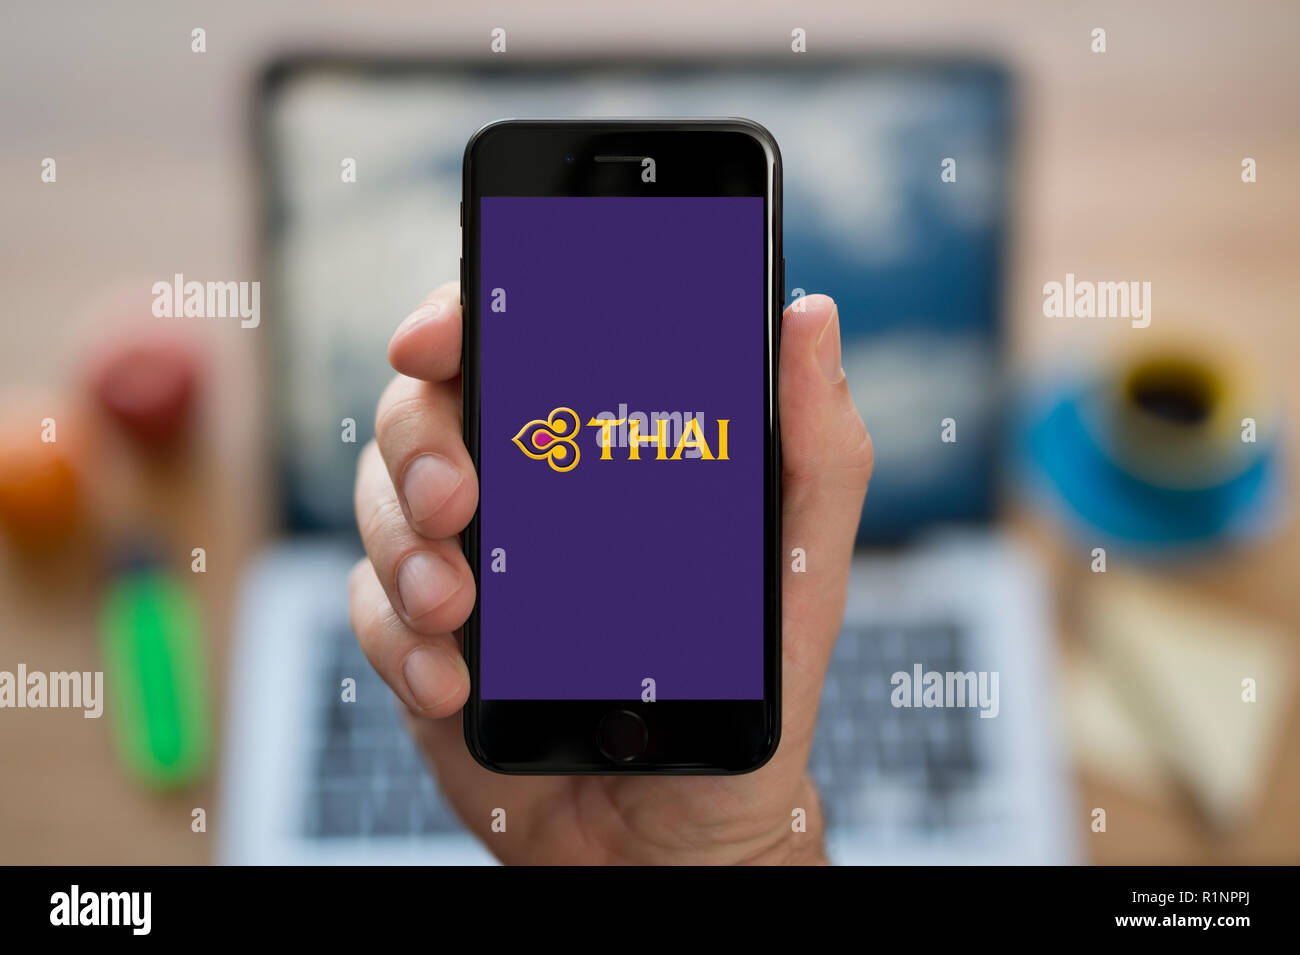 A man looks at his iPhone which displays the Thai Airways logo, while sat at his computer desk (Editorial use only). Stock Photo